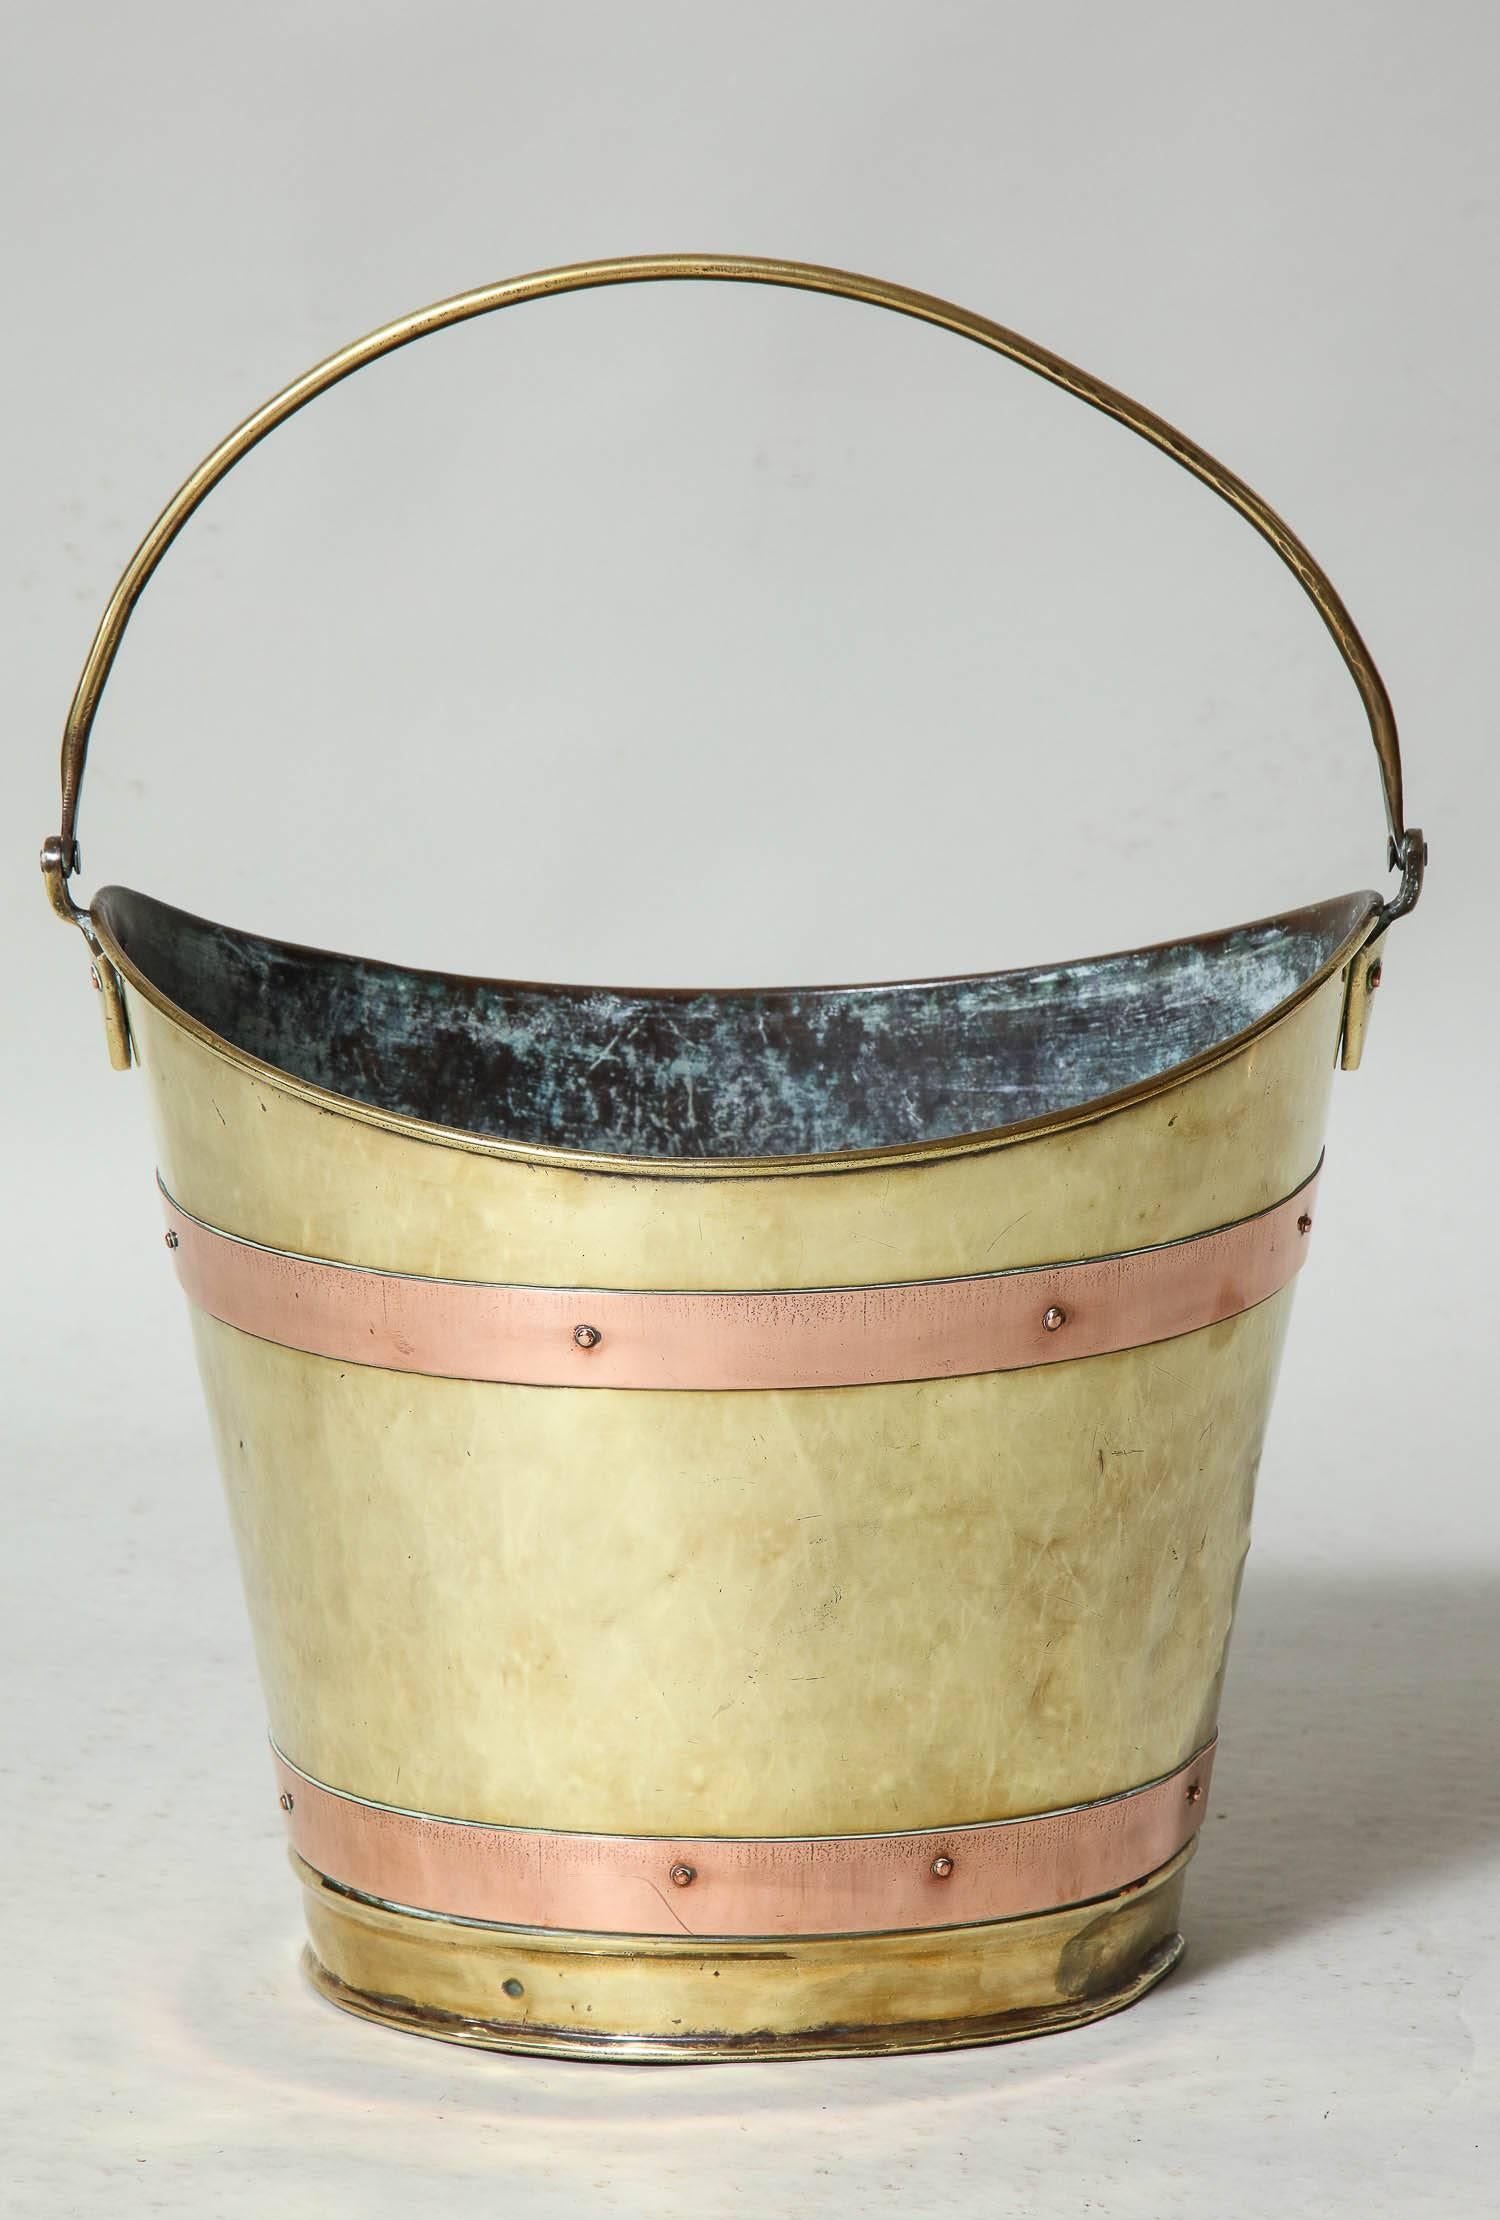 Unusual 19th century boat shaped bucket in brass with copper banding and brass carrying handle, useful for a waste-paper basket or for kindling next to a fireplace.